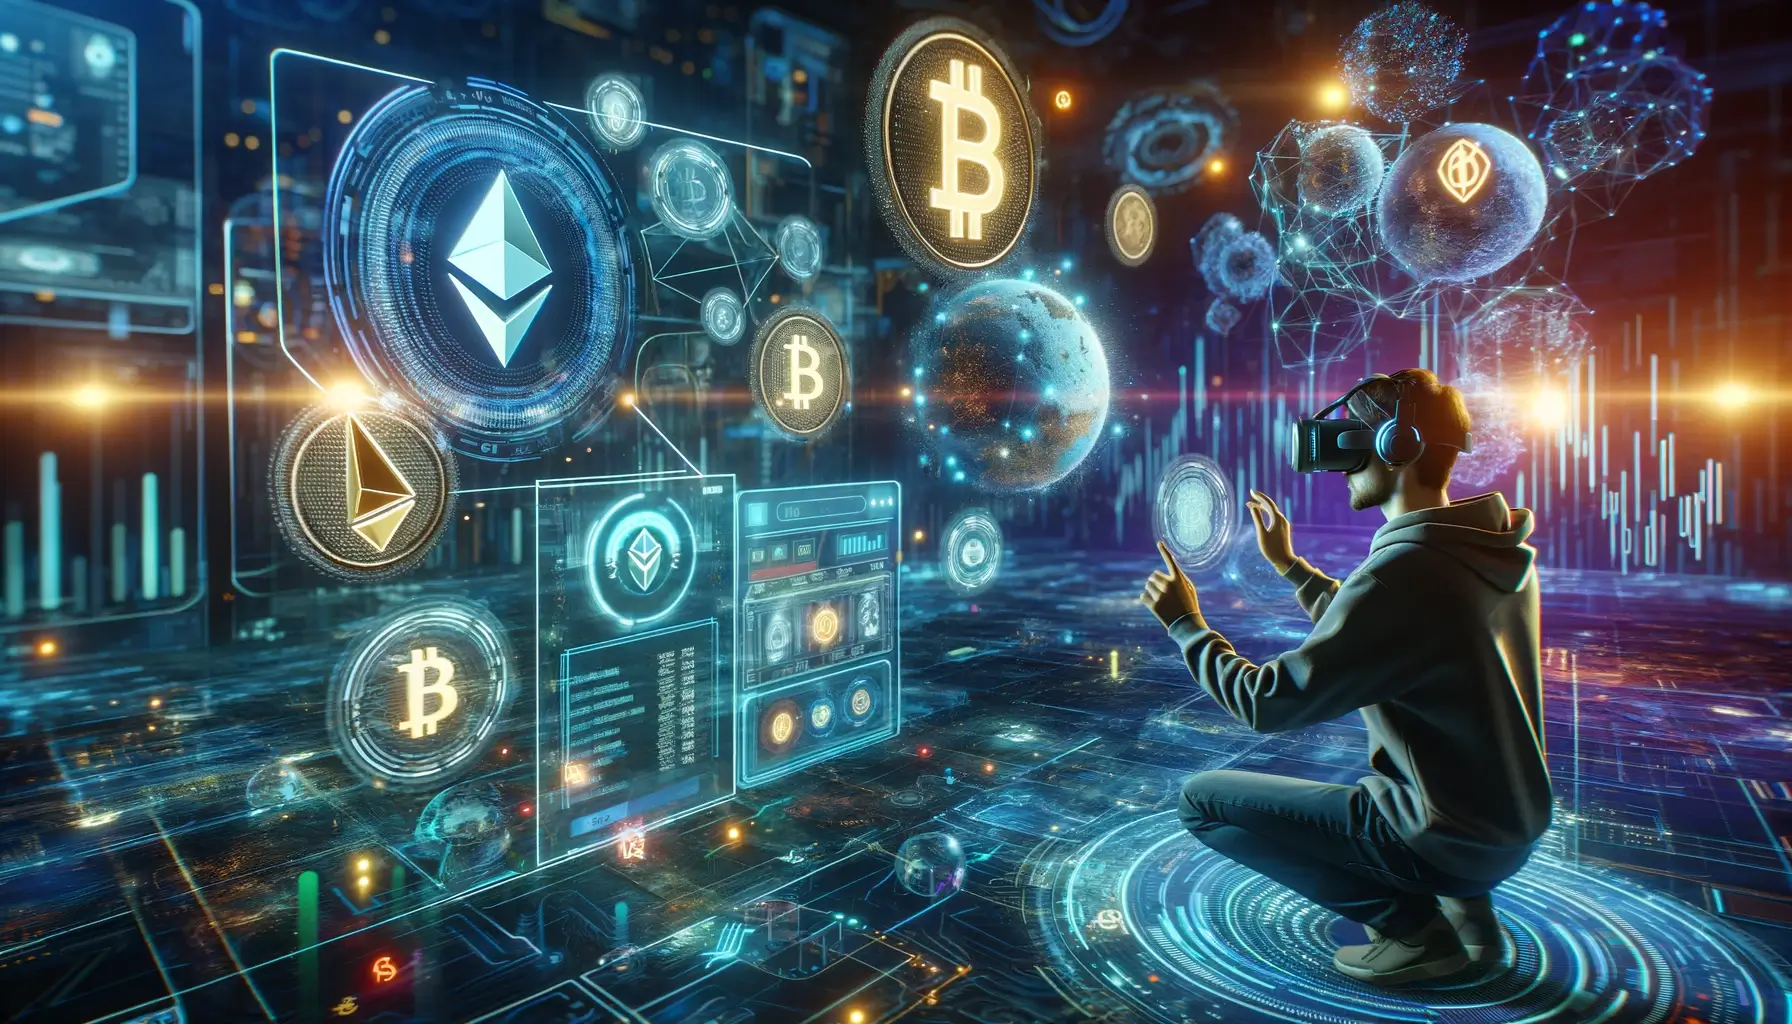 Cryptocurrencies and the Metaverse